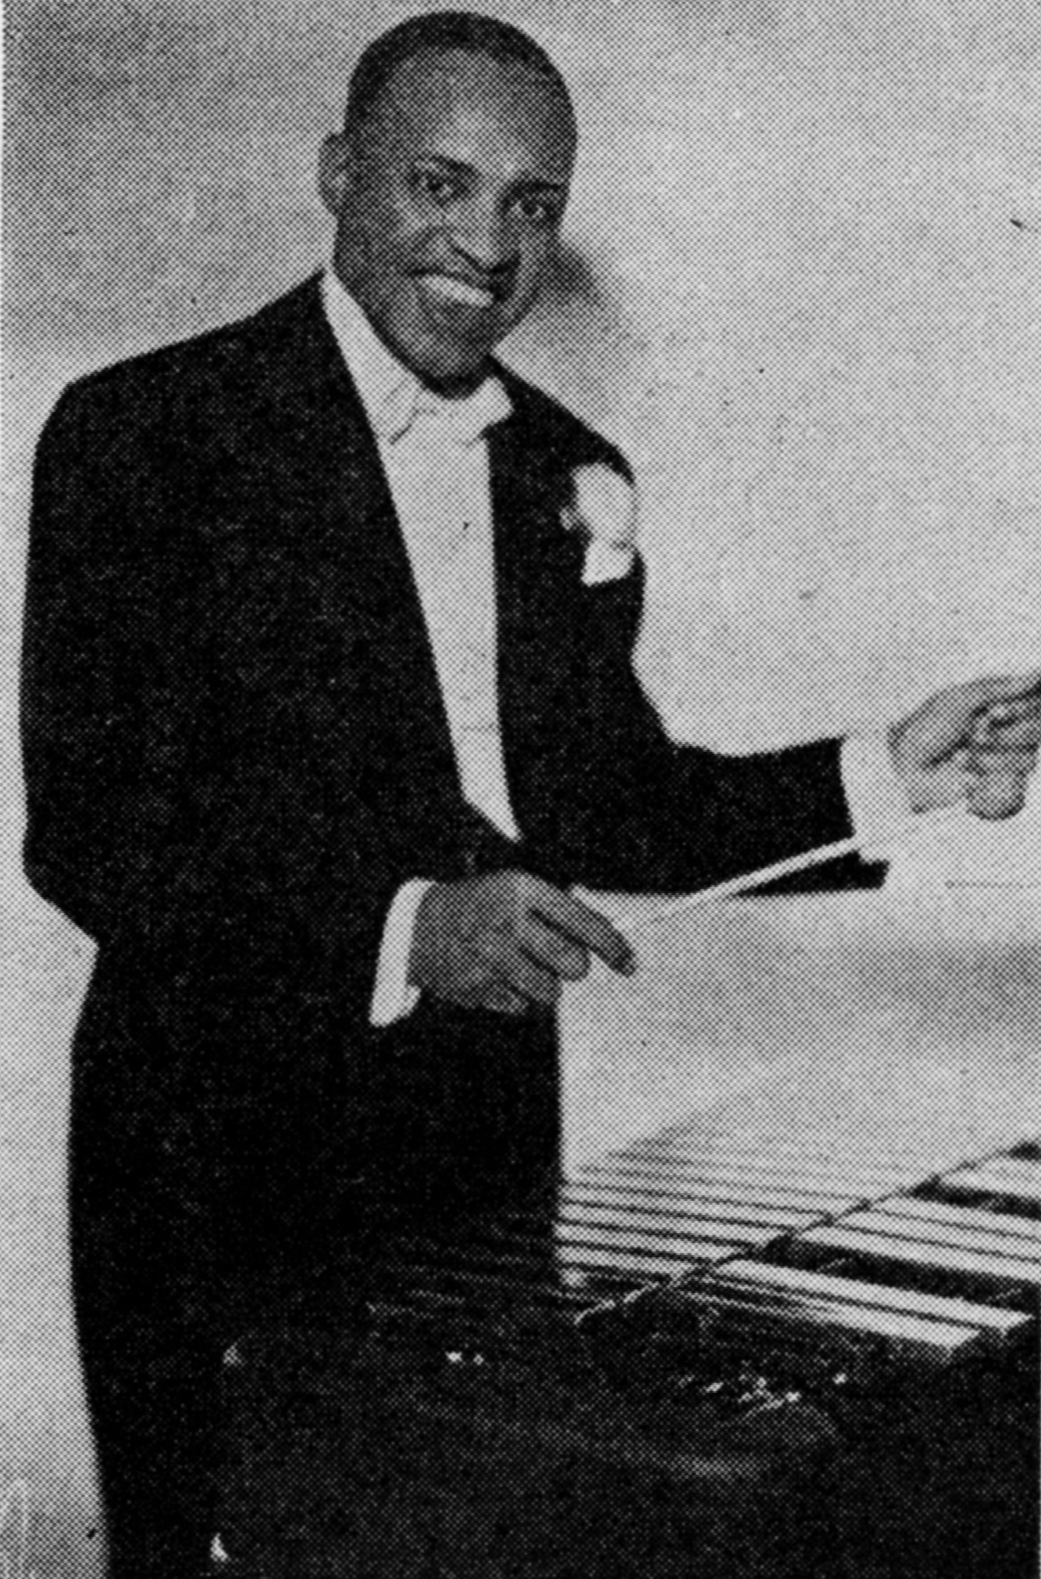 photograph of Lionel Hampton standing in front of a xylophone